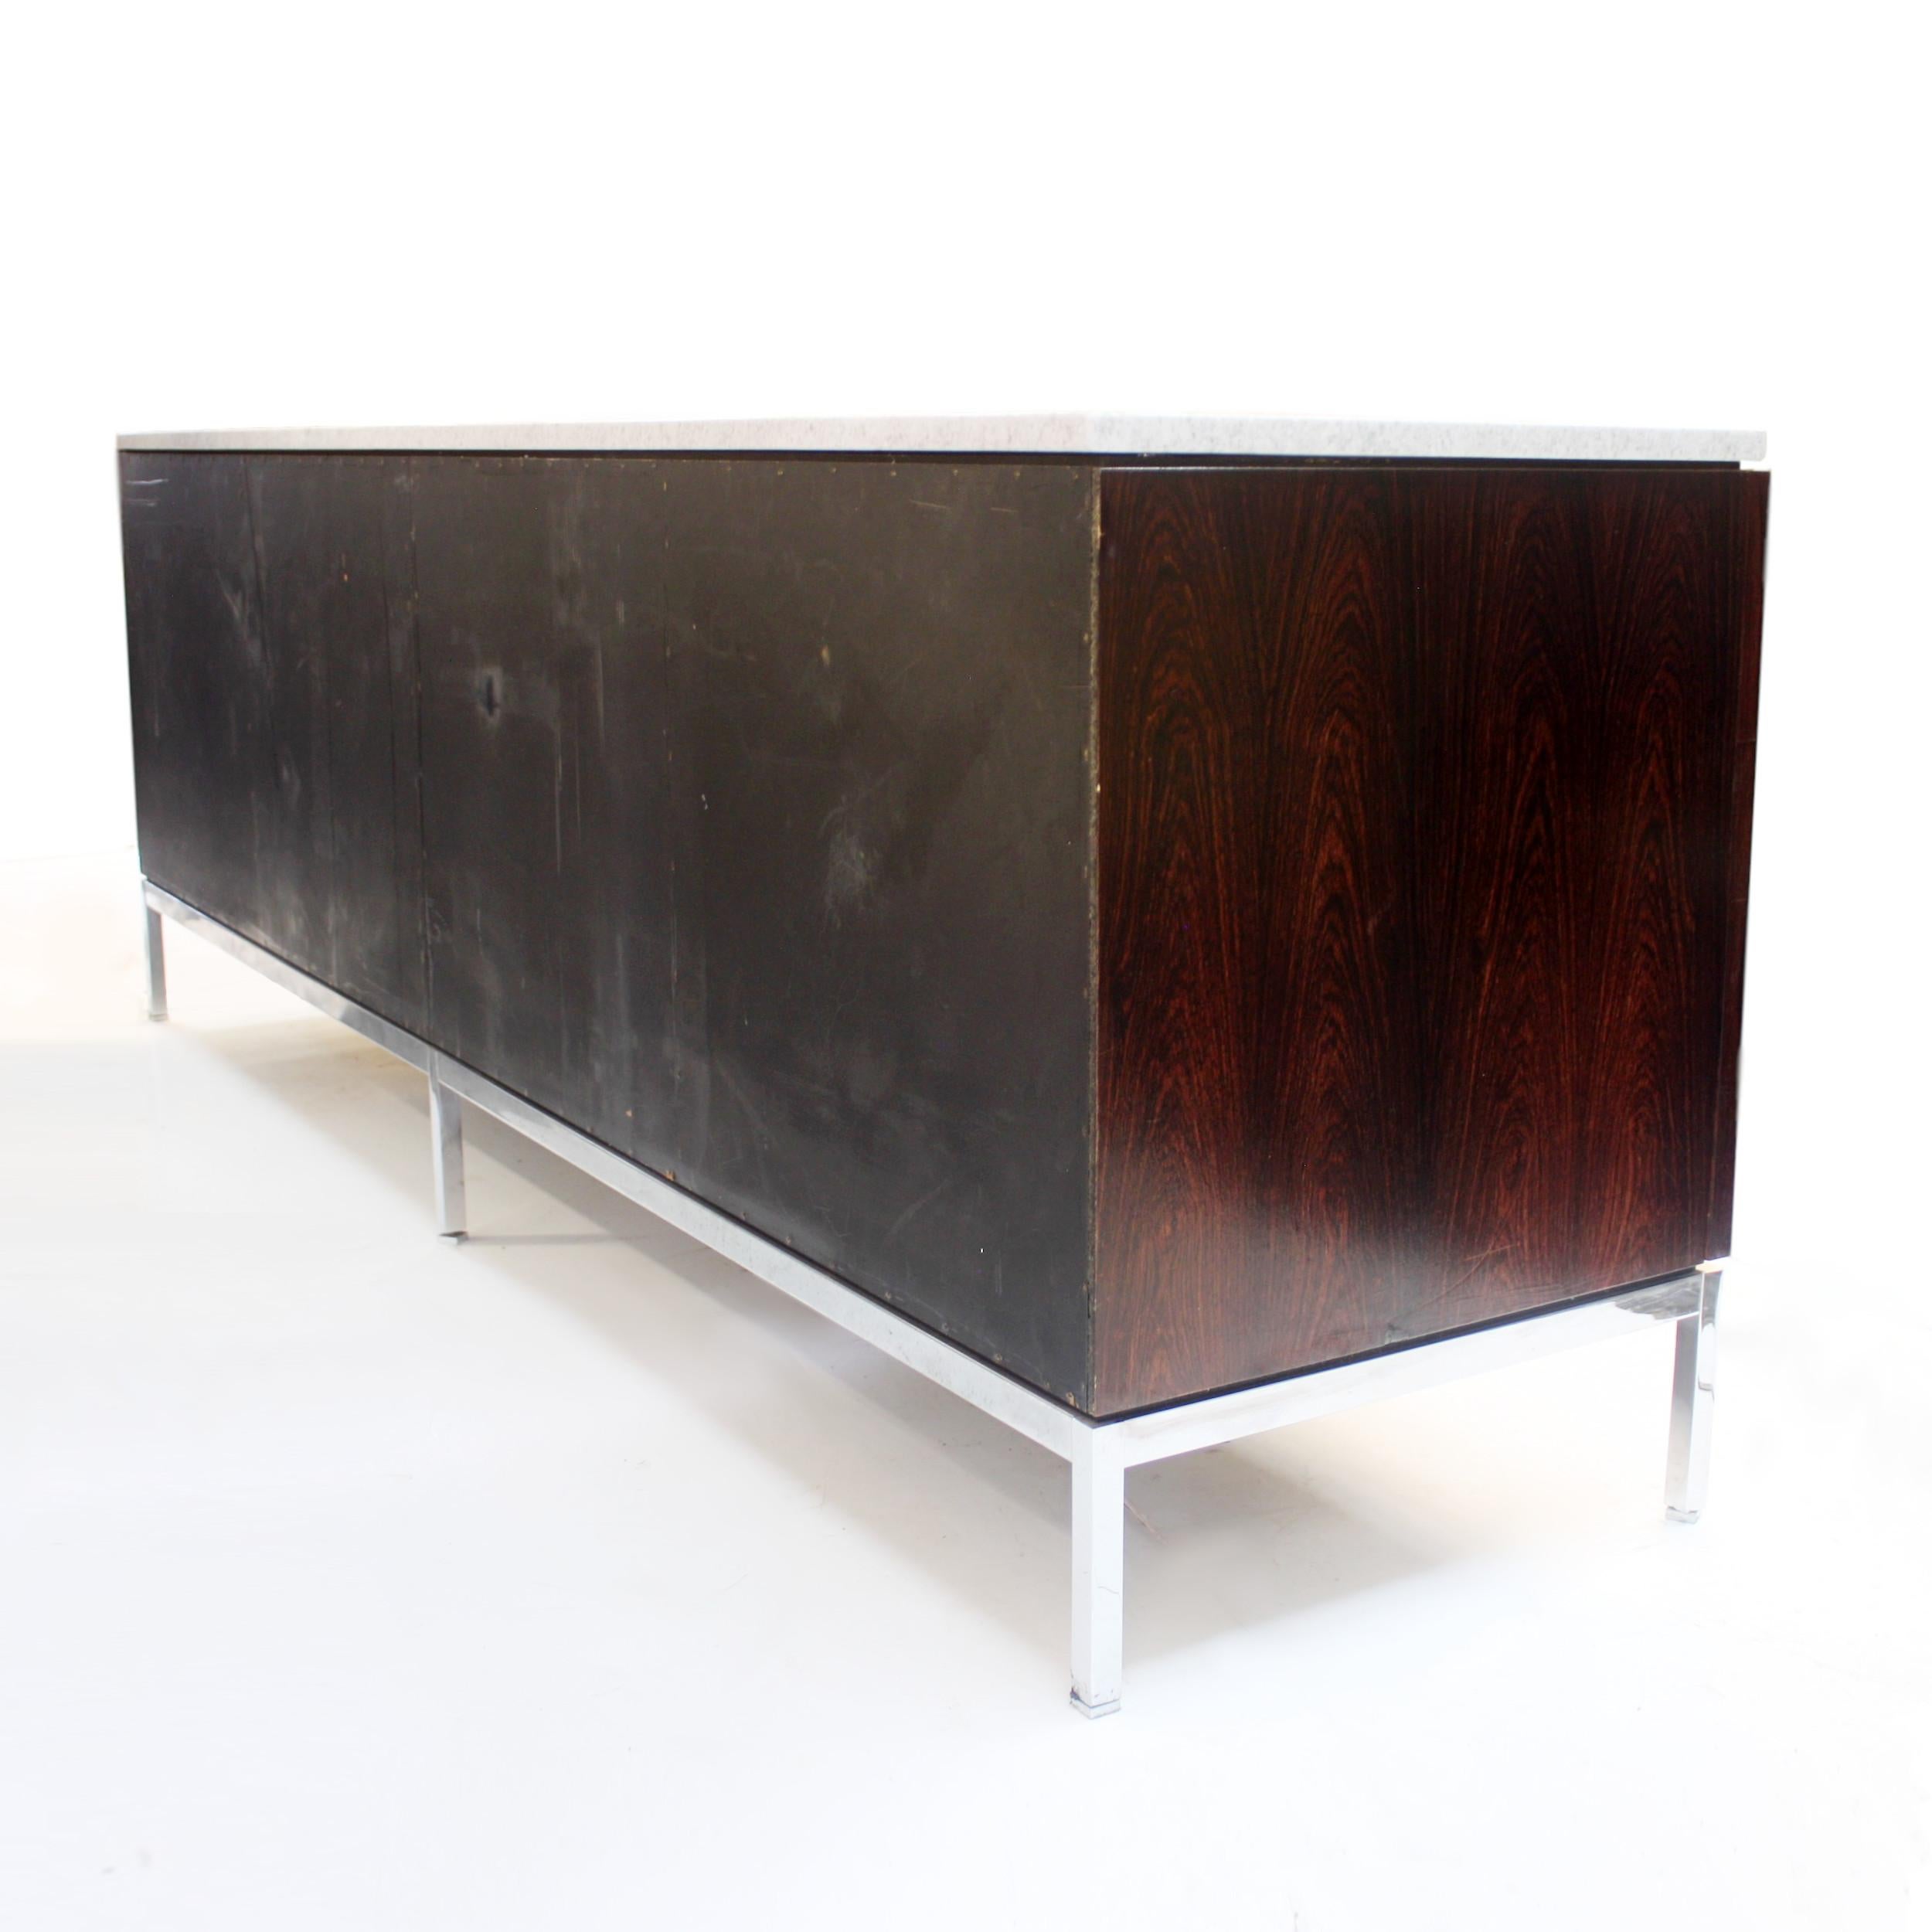 American Vintage 1970s Mid-Century Modern Rosewood Credenza Console by Florence Knoll